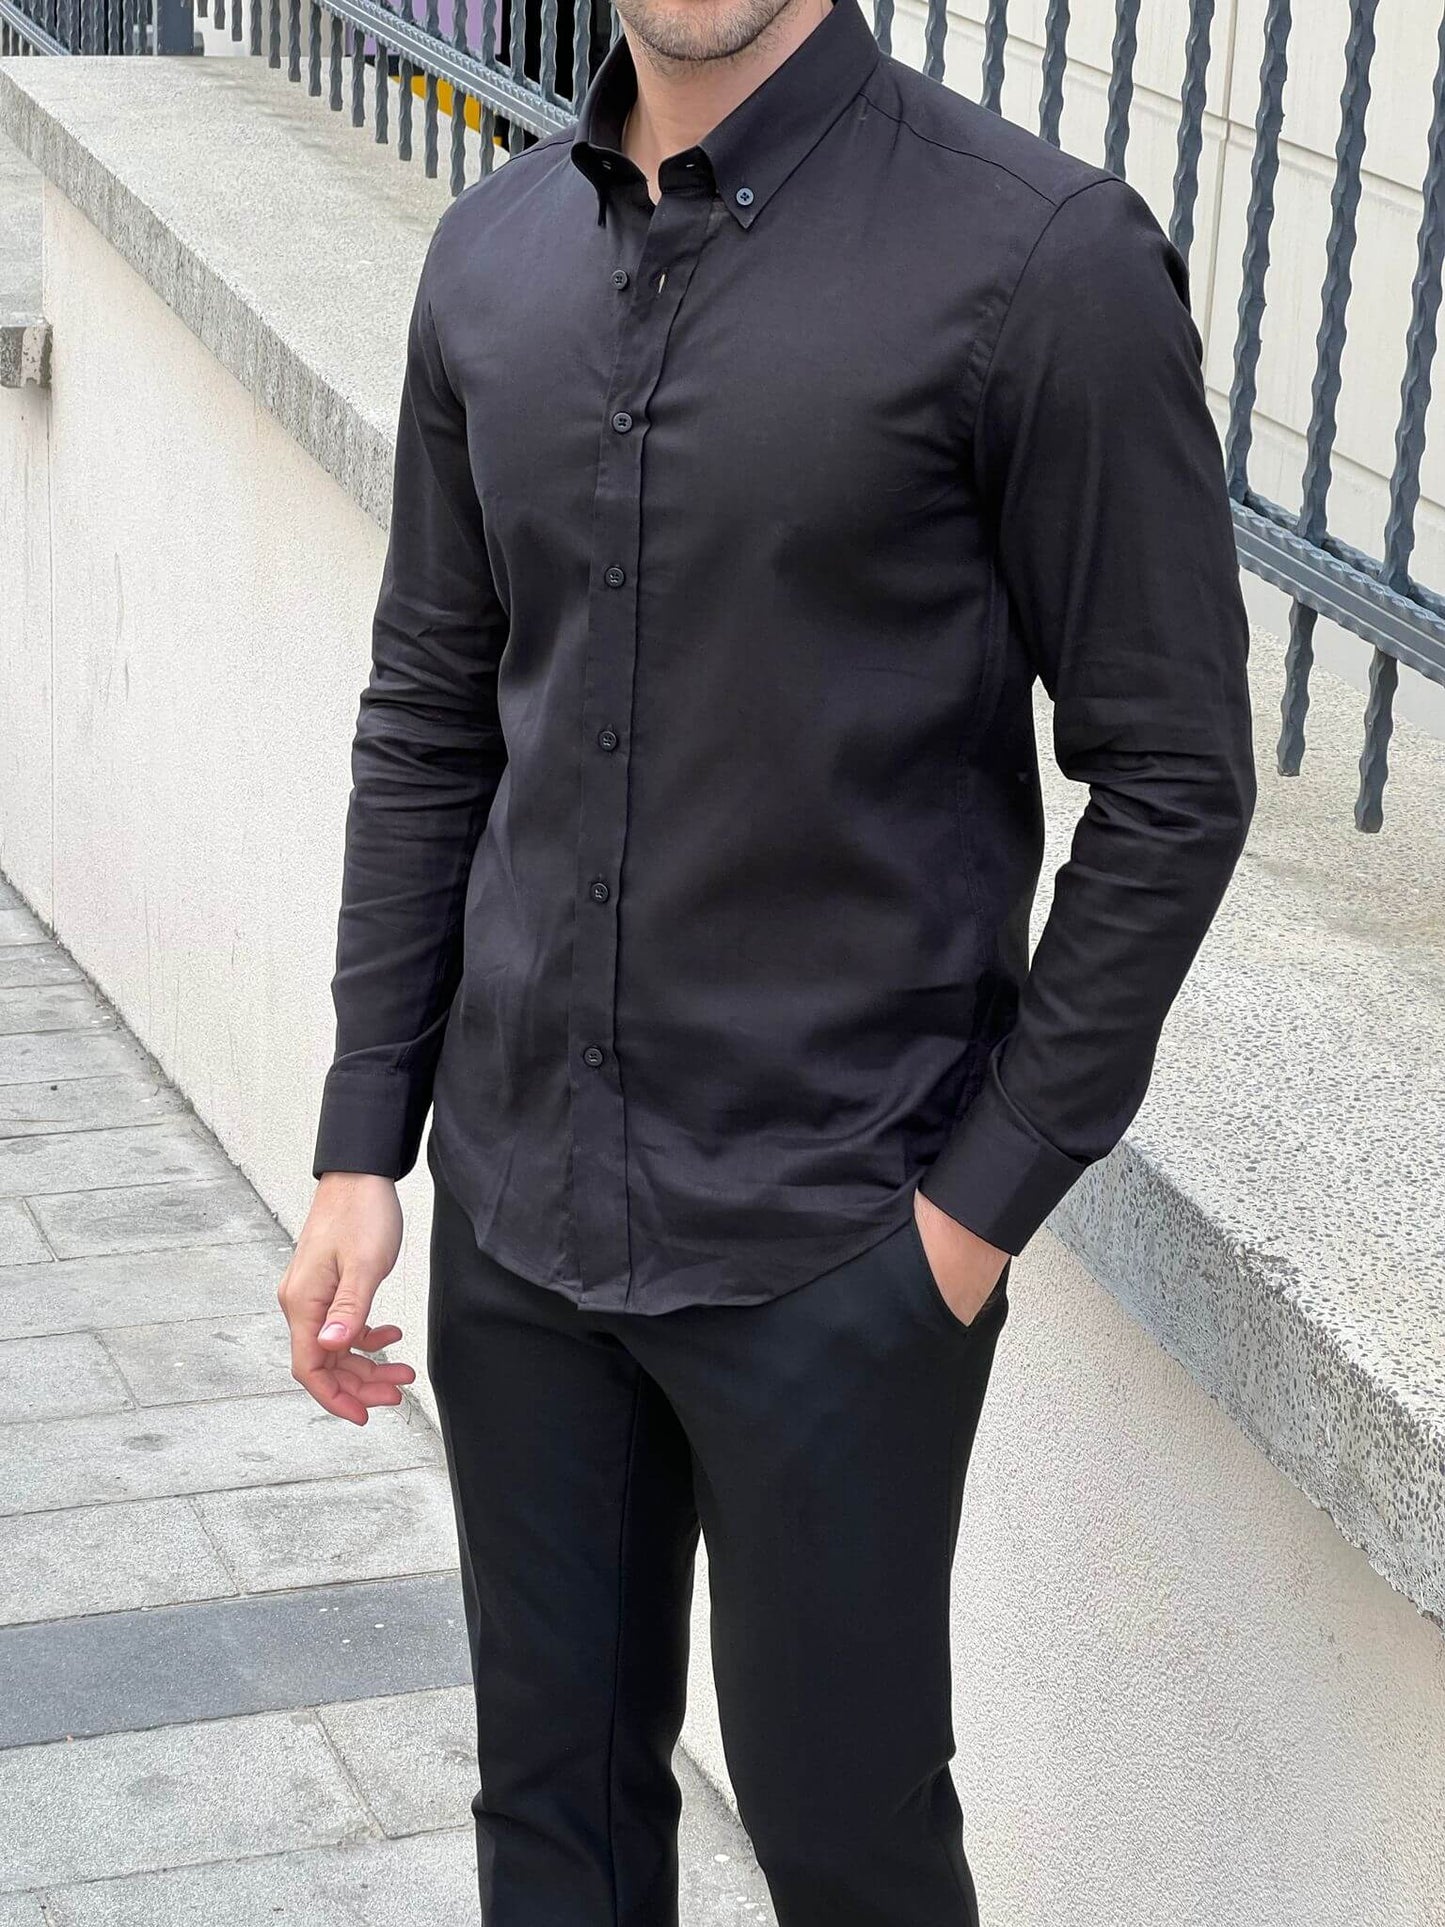 Captivating image of a male model in a black cotton shirt, highlighting comfort and elegance.